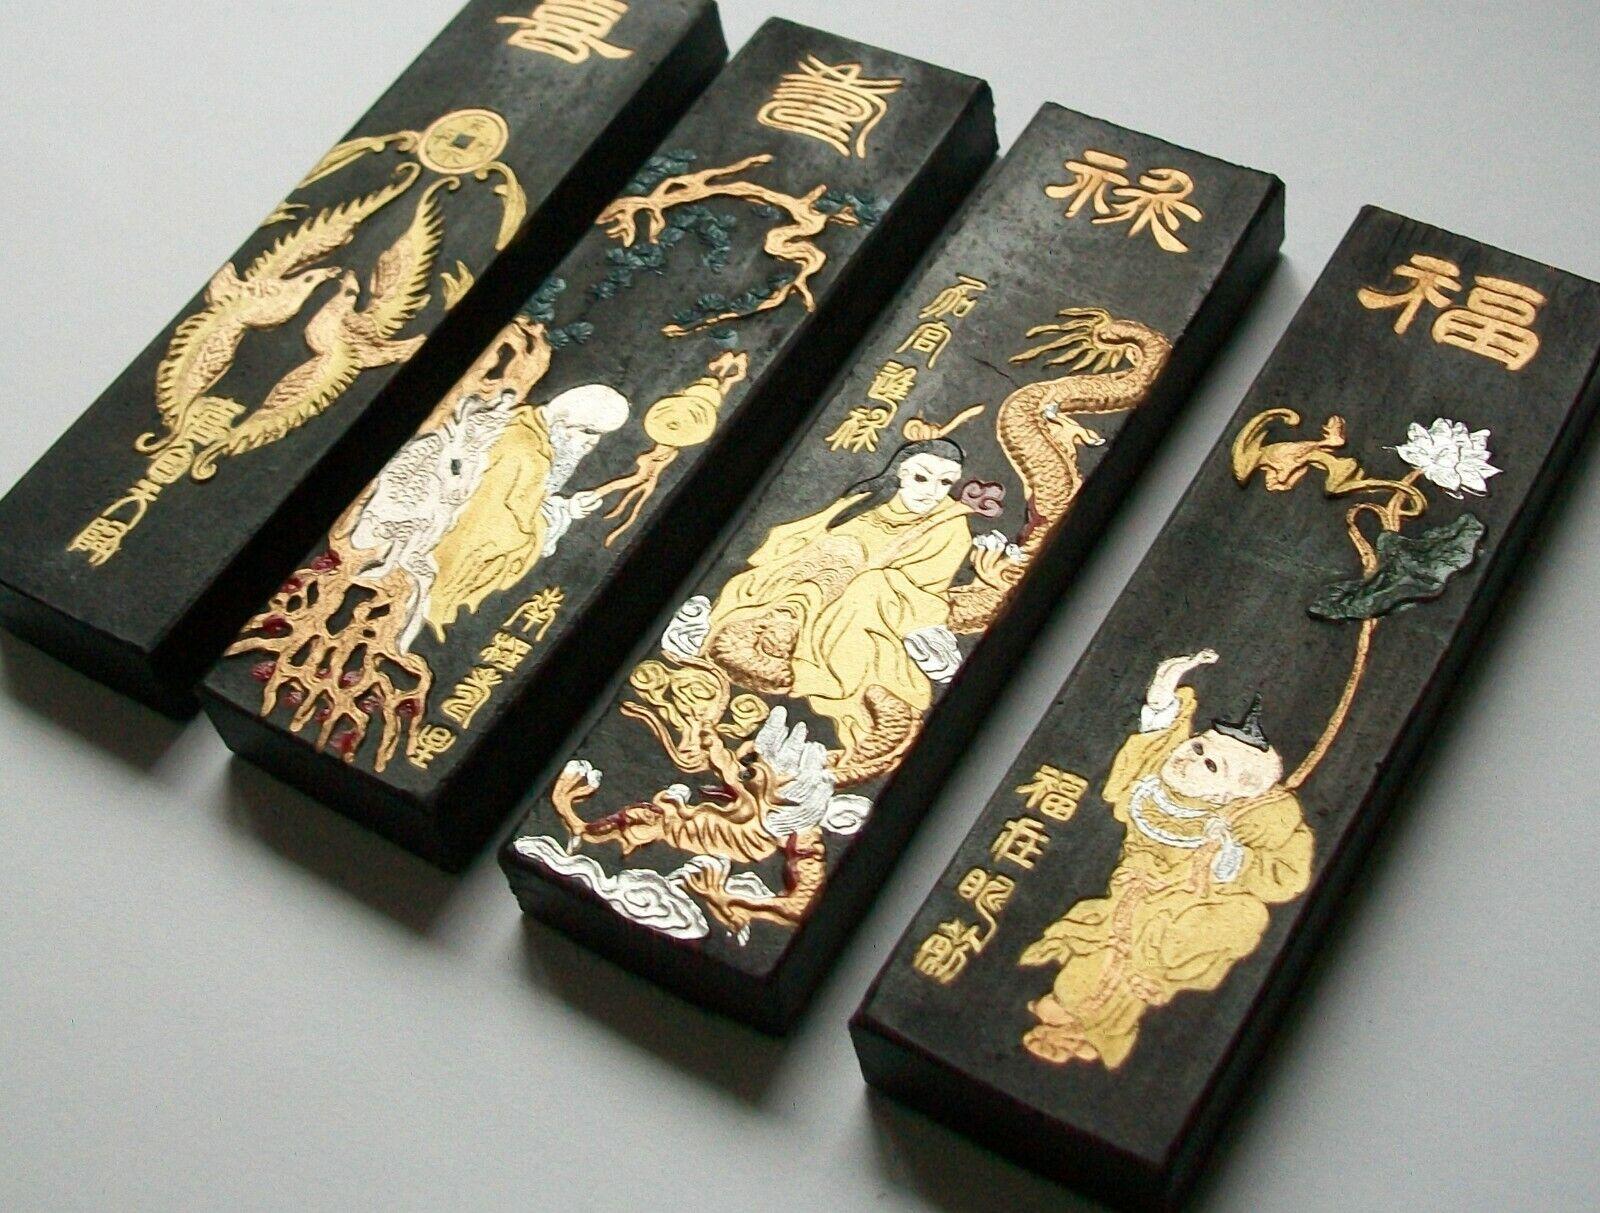 Chinese Export Vintage Gilt Decorated Ink Sticks - Original Box - China - Mid 20th Century For Sale